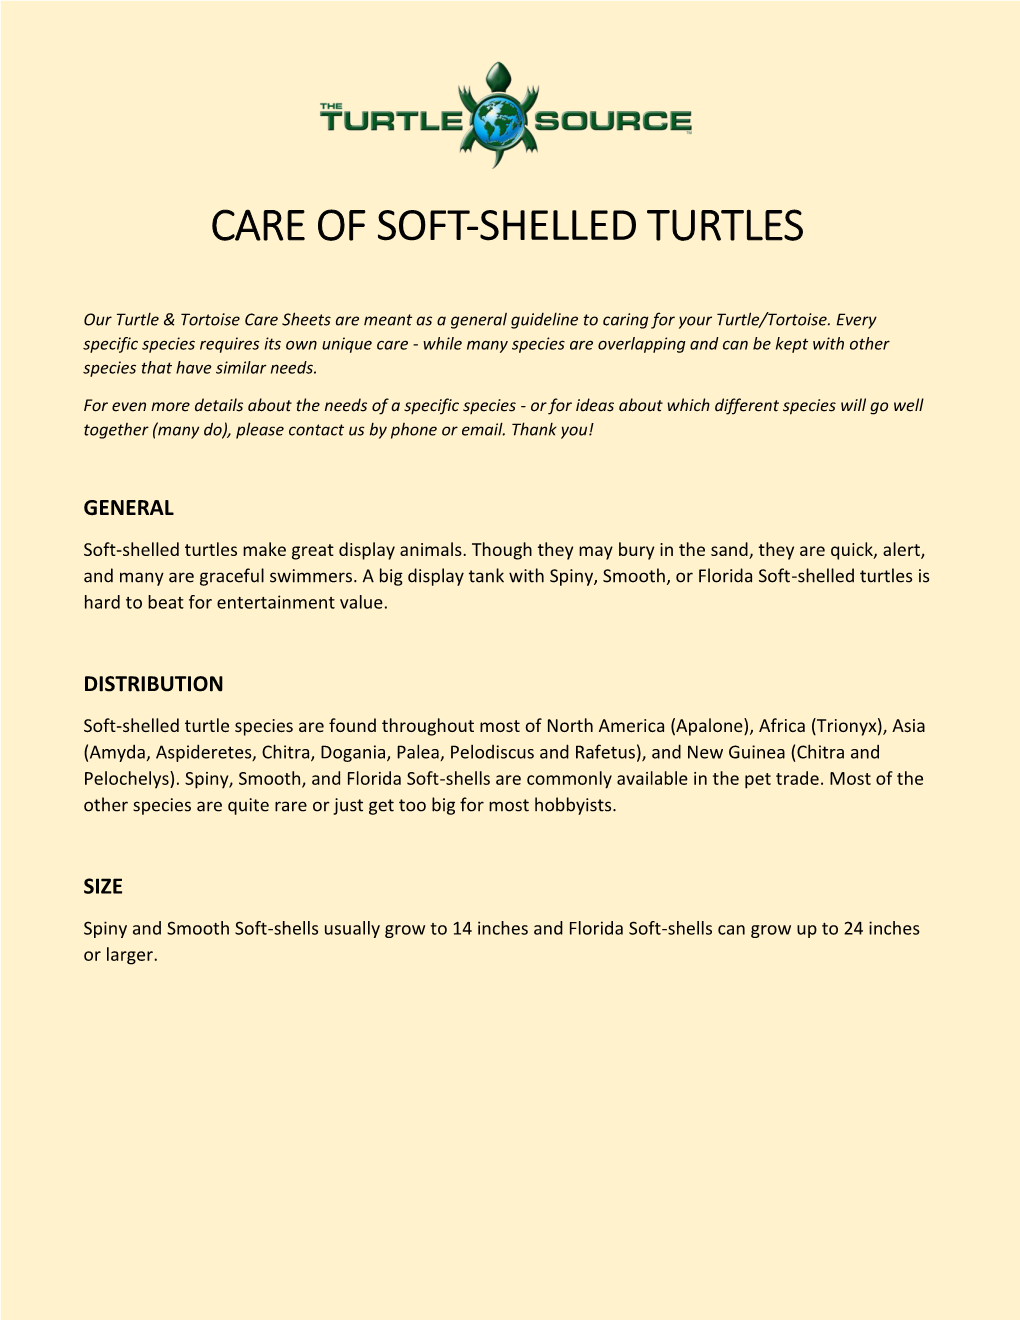 Care of Soft-Shelled Turtles